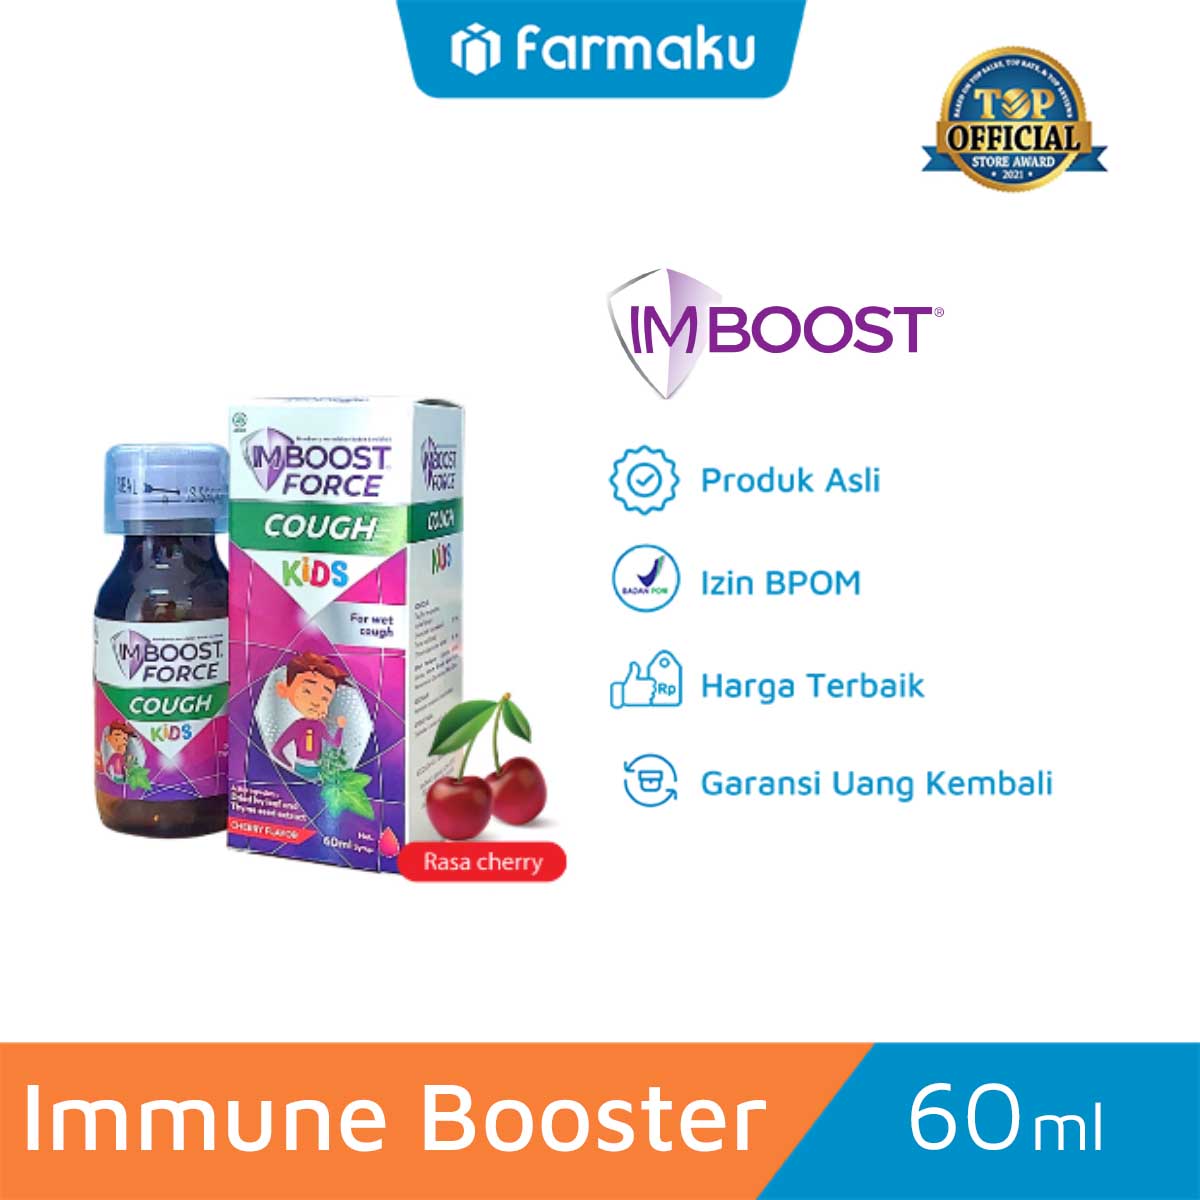 Imboost Force Cough Kids Syrup